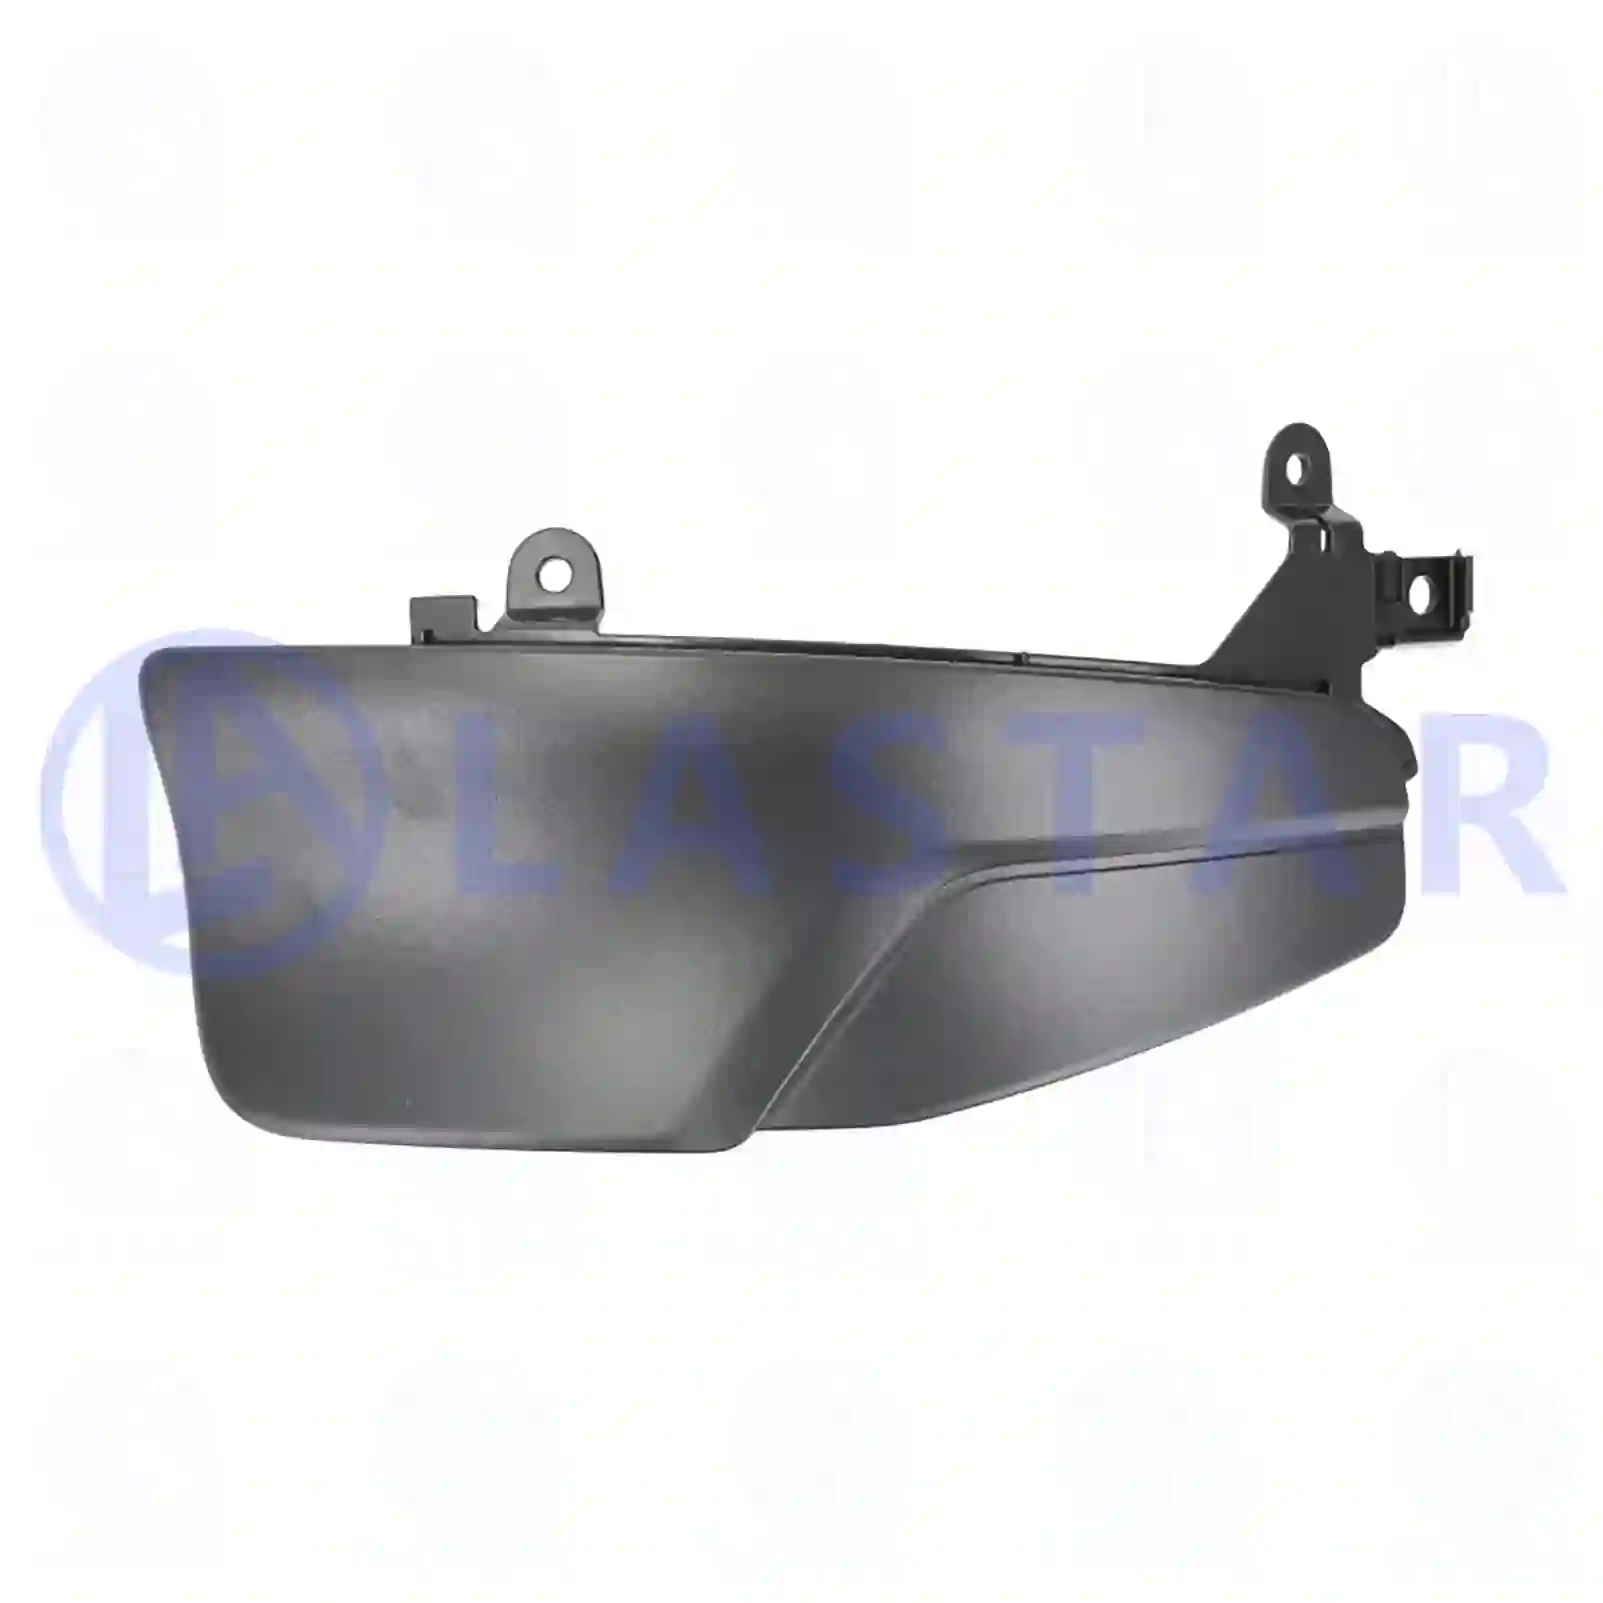 Cover, front grill, right, 77721736, 2162653 ||  77721736 Lastar Spare Part | Truck Spare Parts, Auotomotive Spare Parts Cover, front grill, right, 77721736, 2162653 ||  77721736 Lastar Spare Part | Truck Spare Parts, Auotomotive Spare Parts